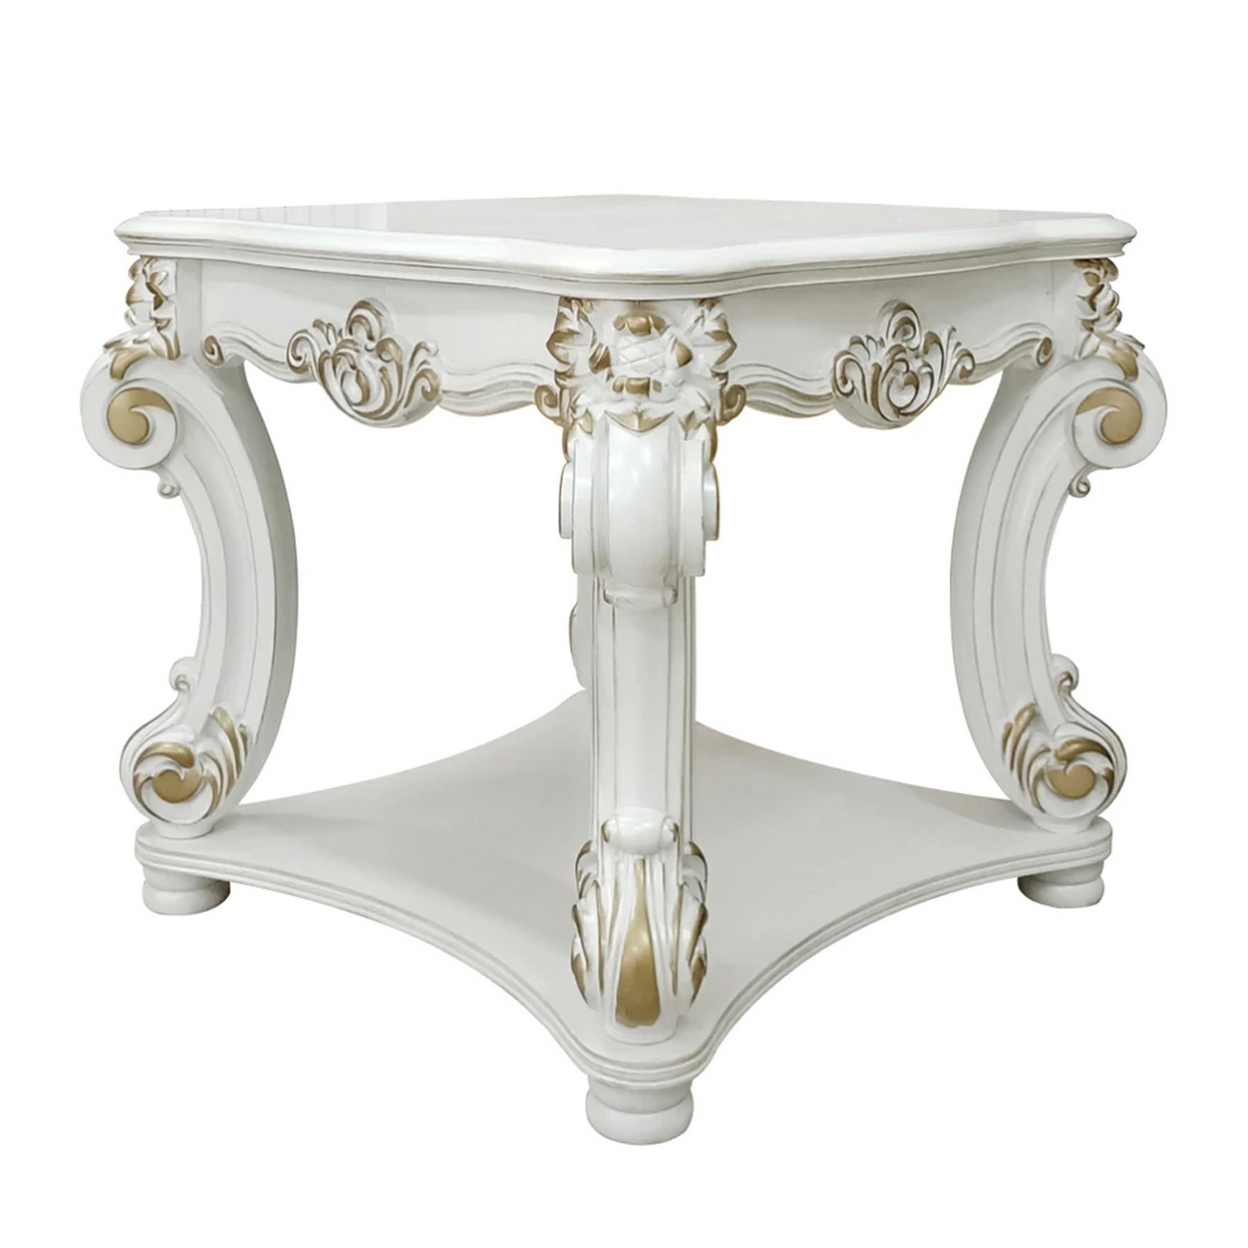 Jess 31 Inch Side End Table, Classic Scrolled Legs, White, Brushed Gold - Saltoro Sherpi